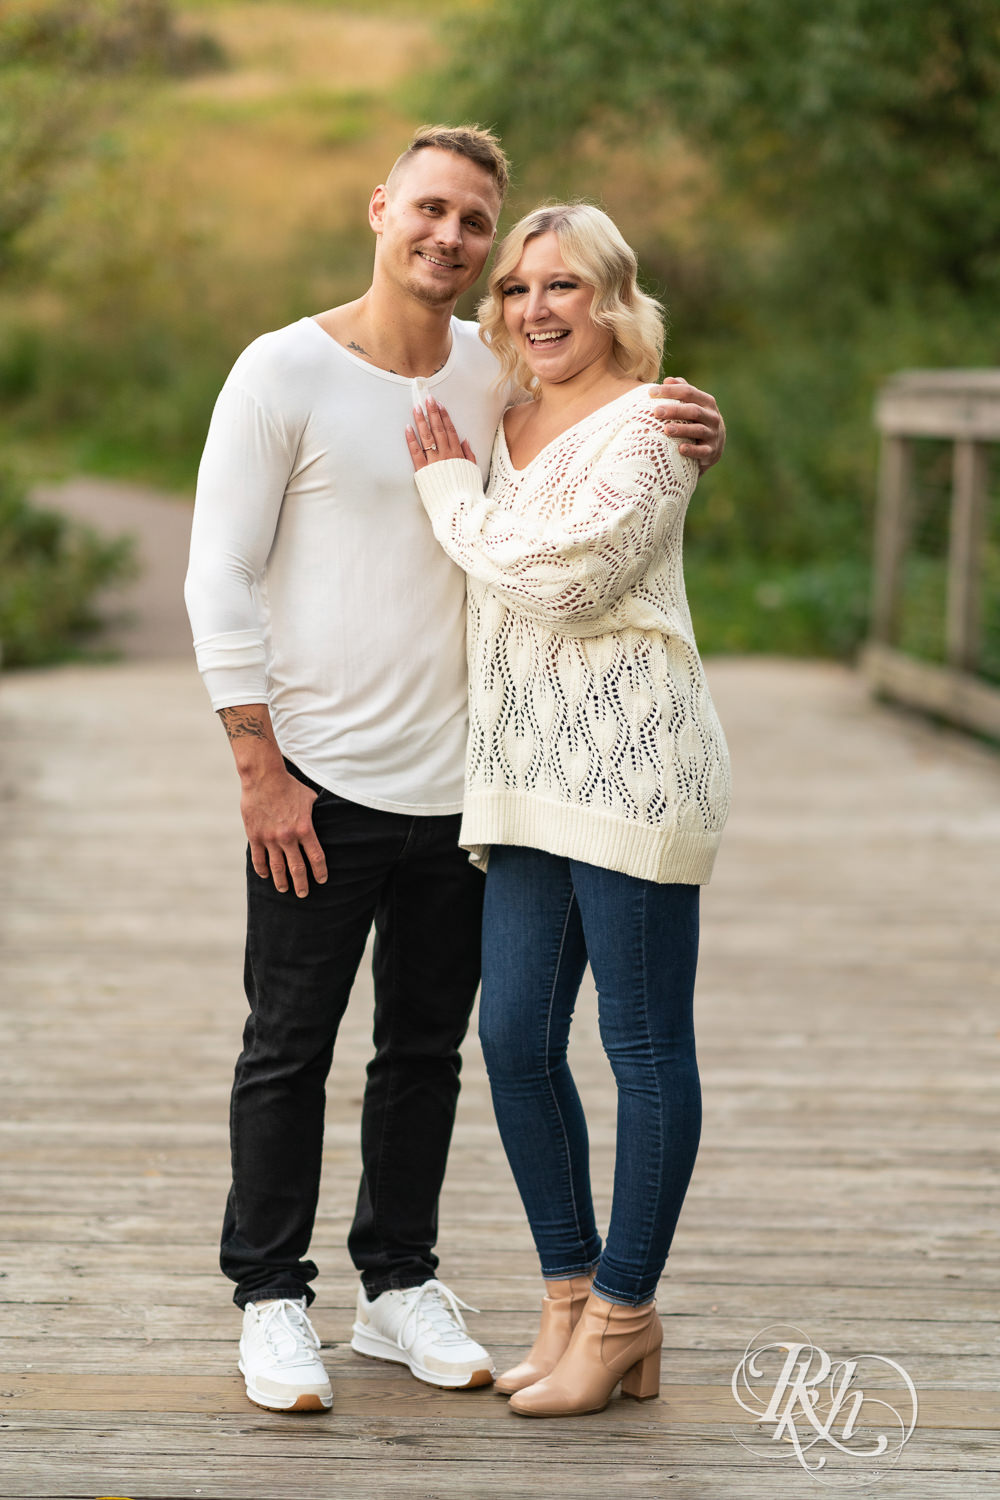 Blond woman and man in white shirts and jeans smile on bridge during sunset engagement photos at Lebanon Hills Regional Park in Eagan, Minnesota.